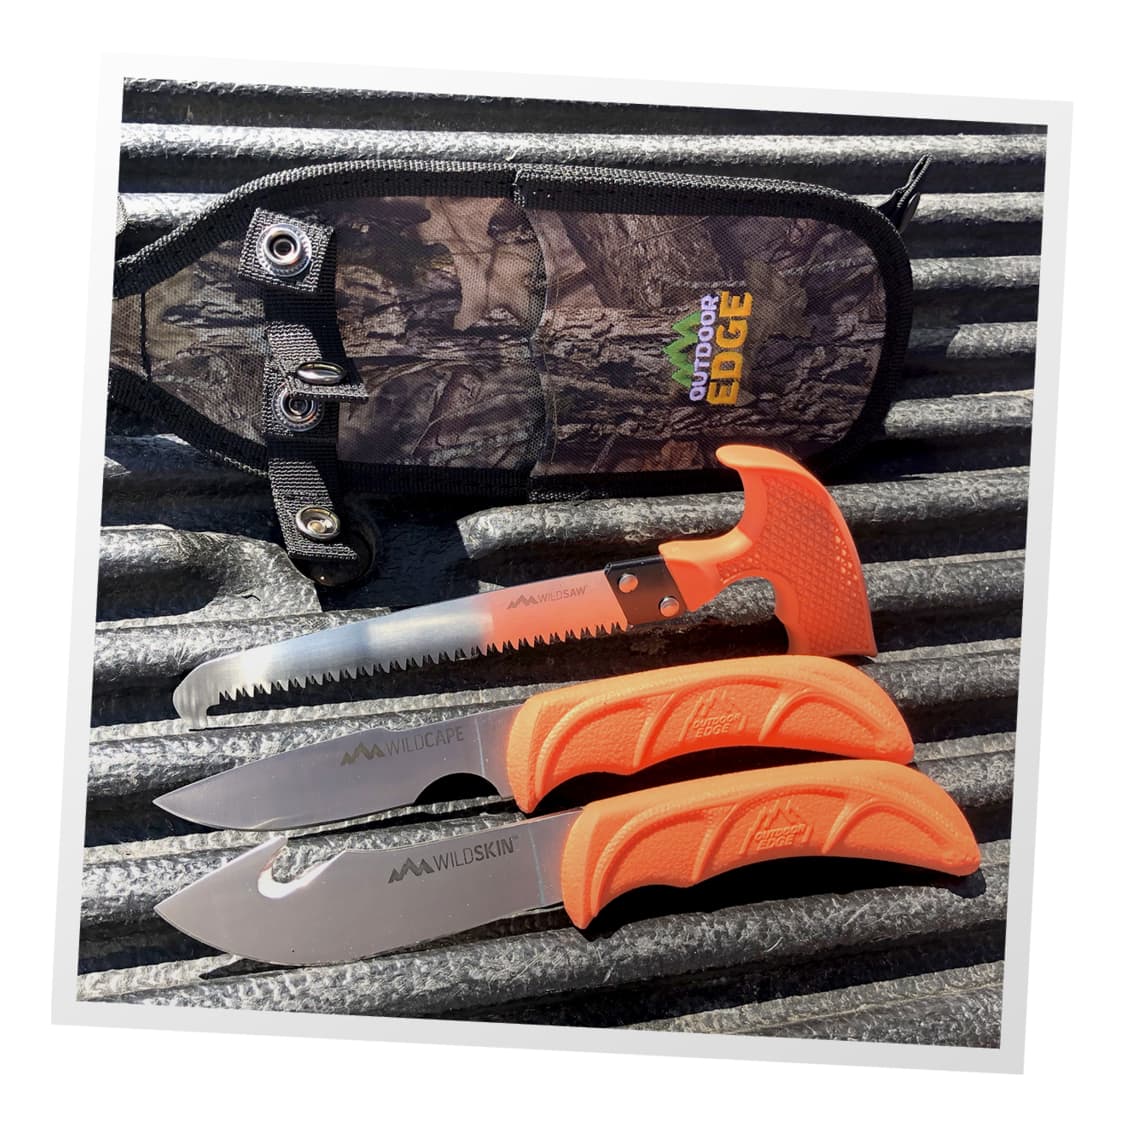 Outdoor Edge® Wildguide Hunting Kit - In the Field